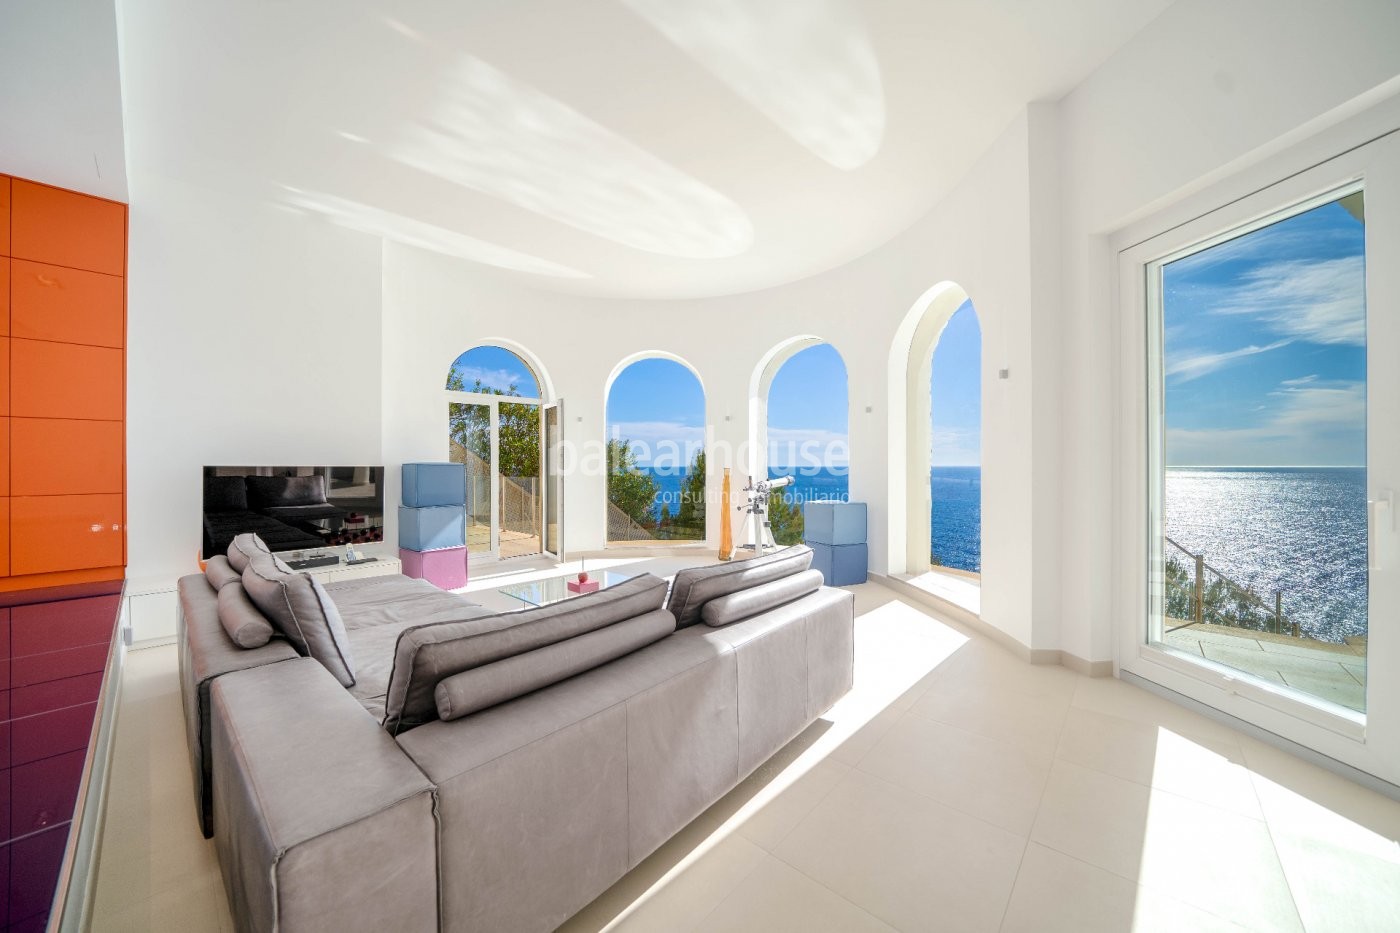 Seafront villa in Port Adriano with breathtaking views and sunsets